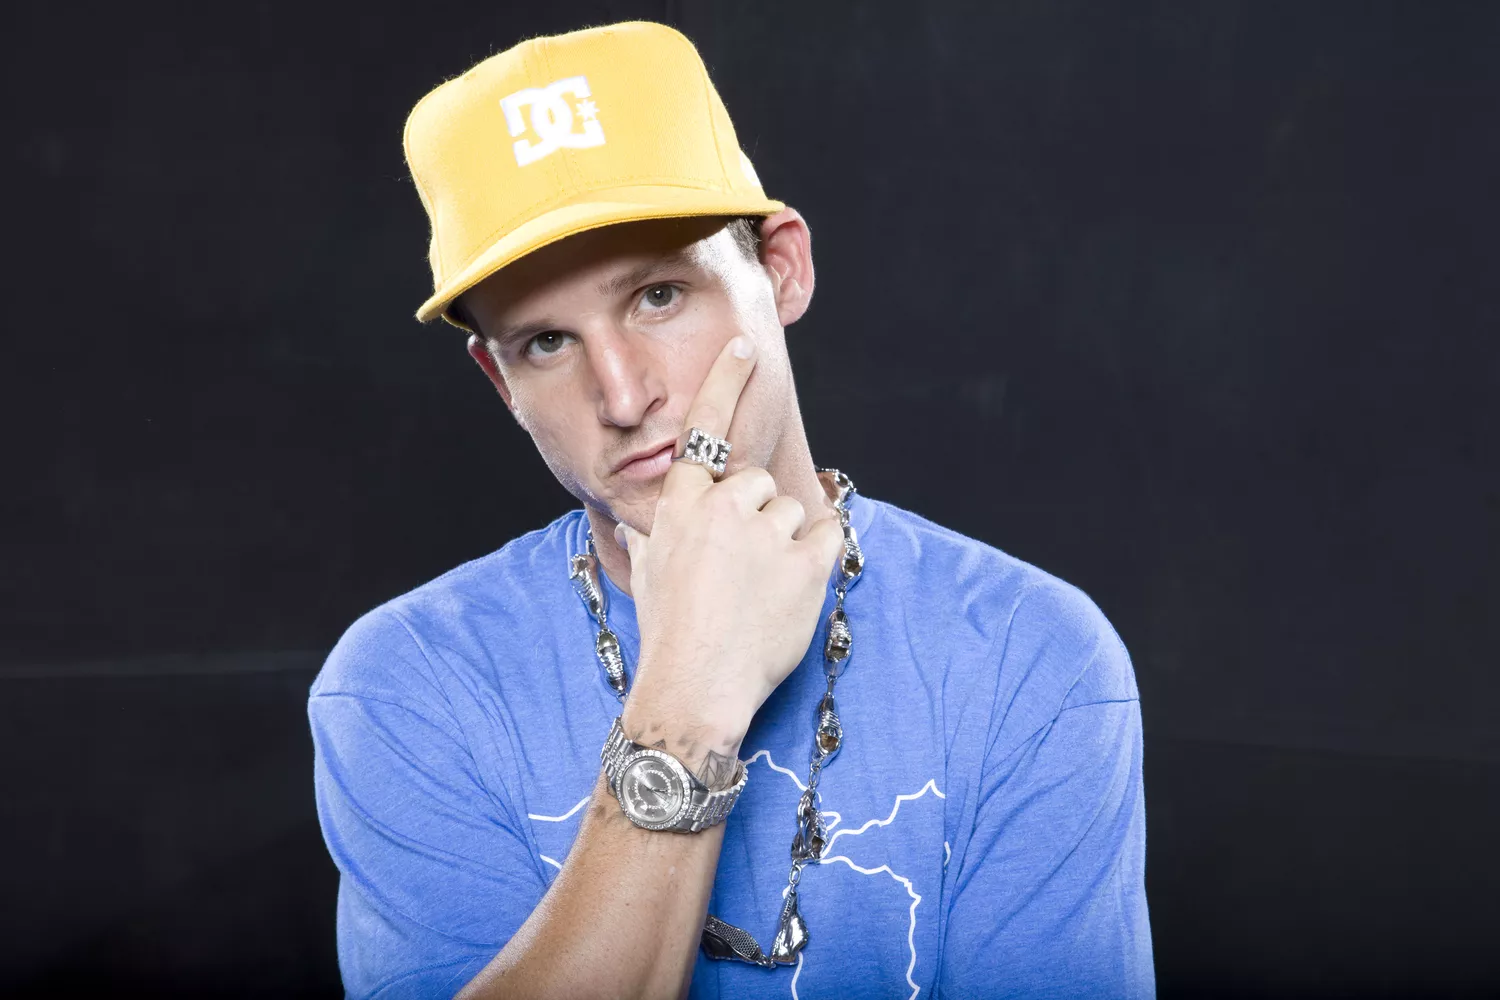 Rob Dyrdek Net Worth and How He Built His Fortune
